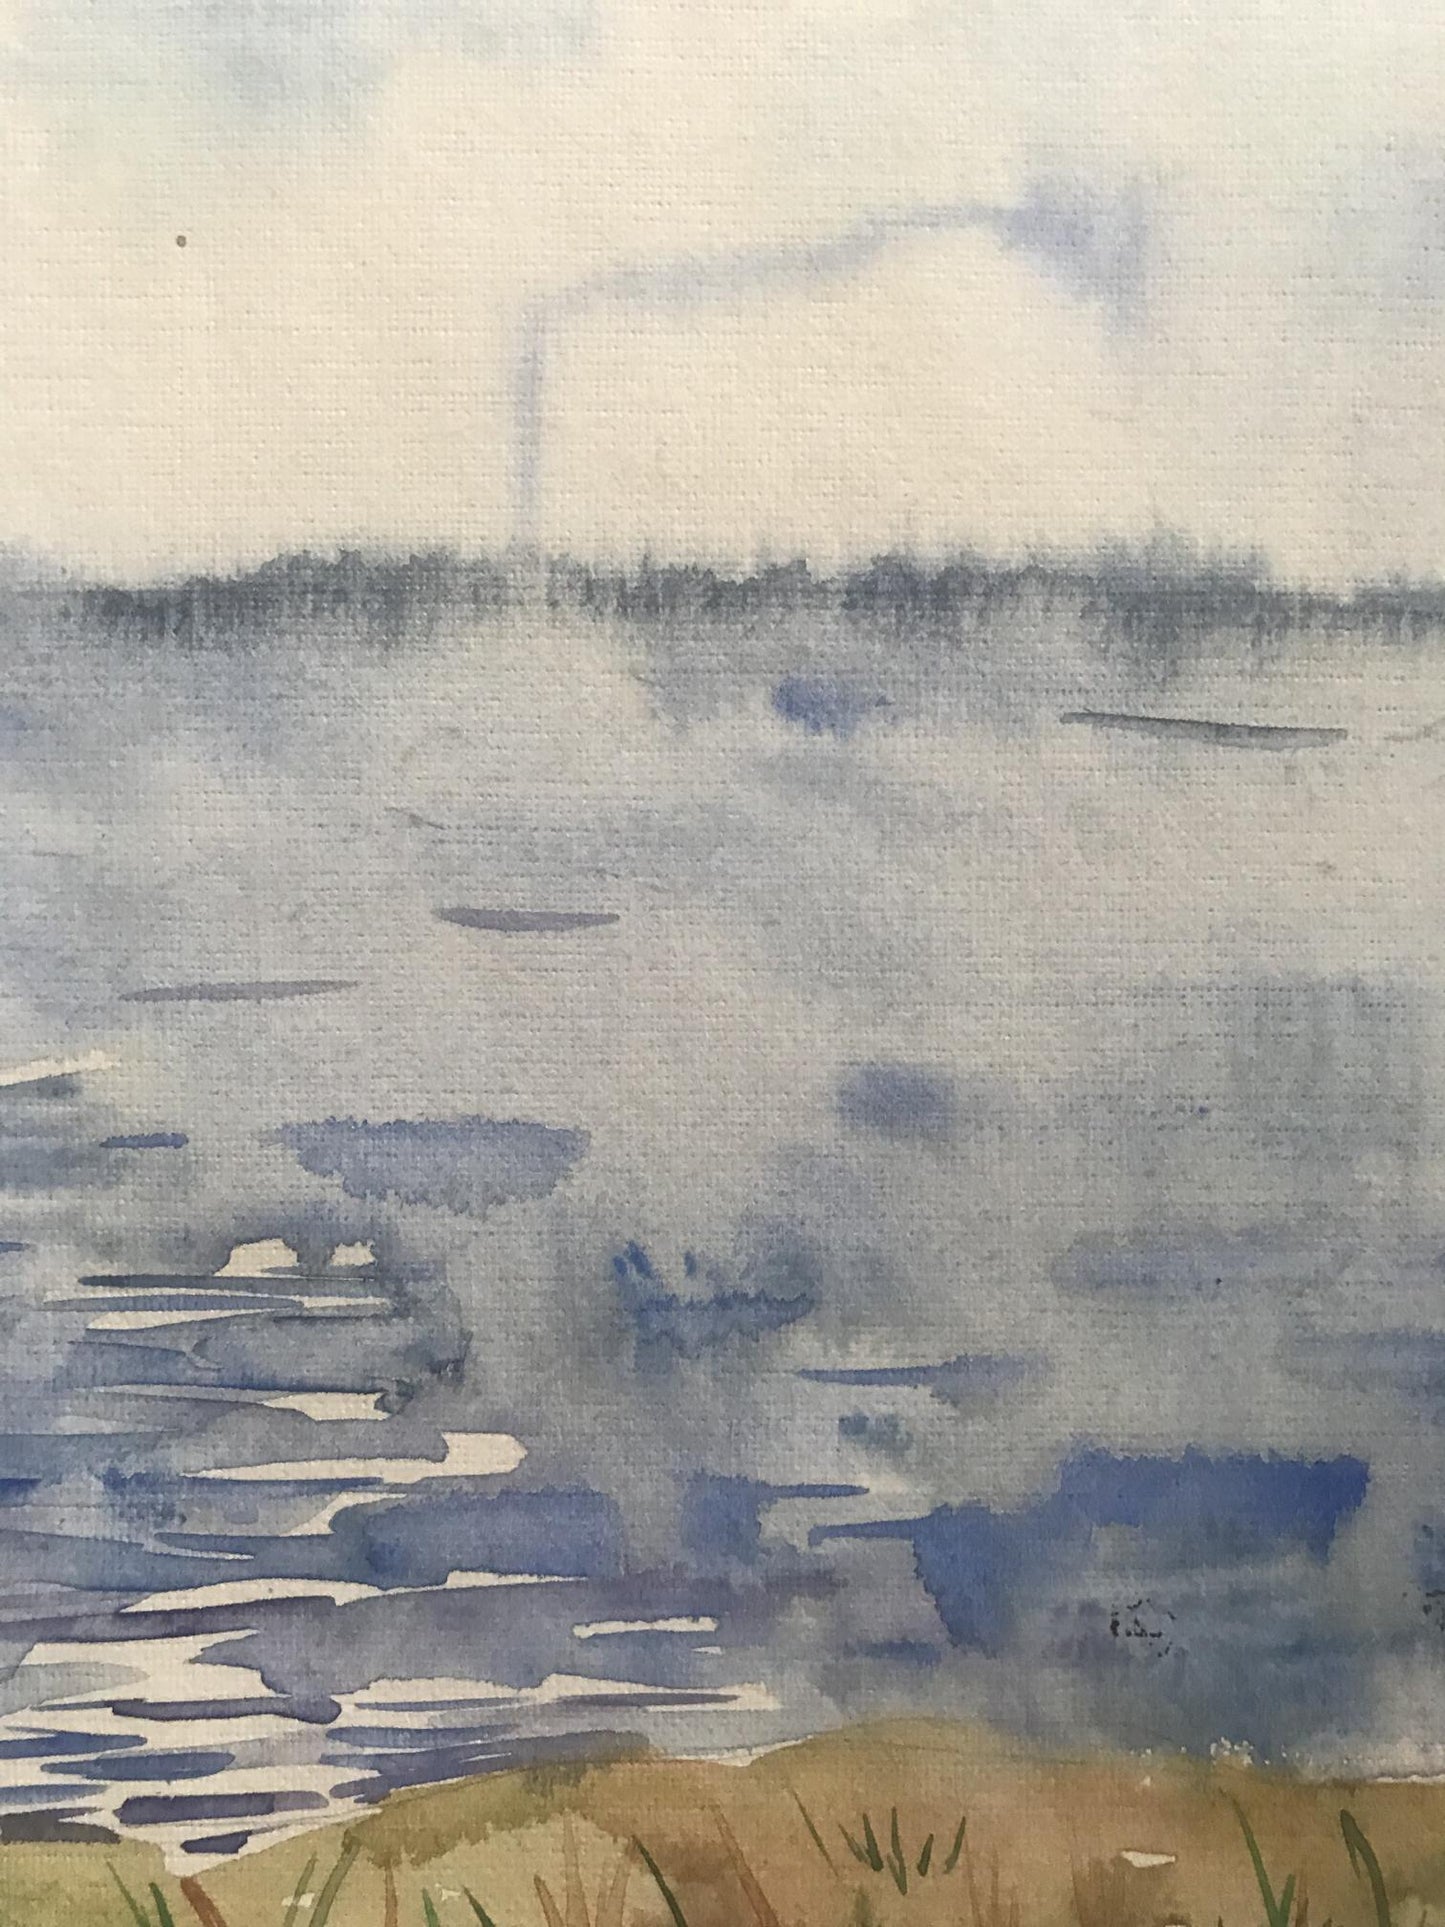 Experience the calmness of the sea with this watercolor painting, "Seascape"